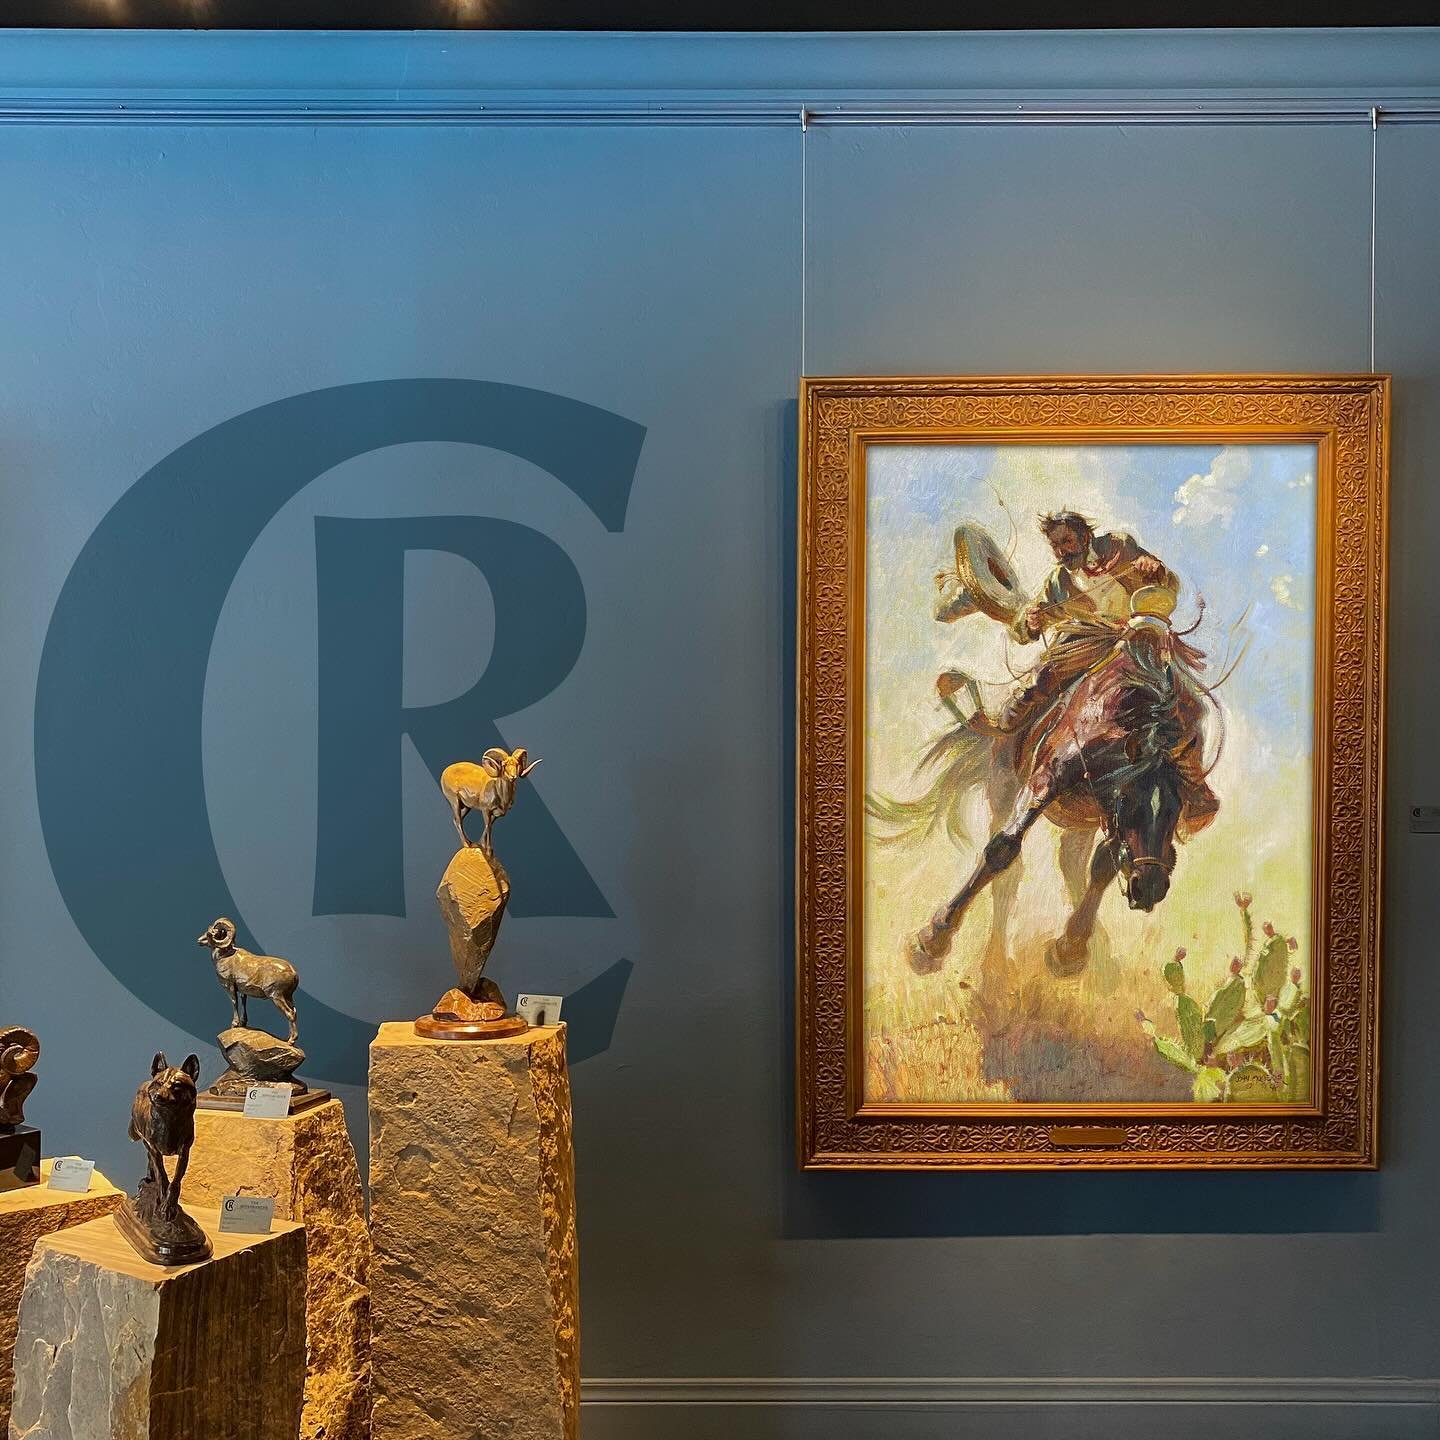 Spring is upon us as we enter a quieter time of year in the Vail Valley, but we are keeping our doors open for locals and visitors alike! Stop by and take in some exceptional art from Jane DeDecker, Josh Elliott, Herb Mignery, John Moyers, Jim Rey, T